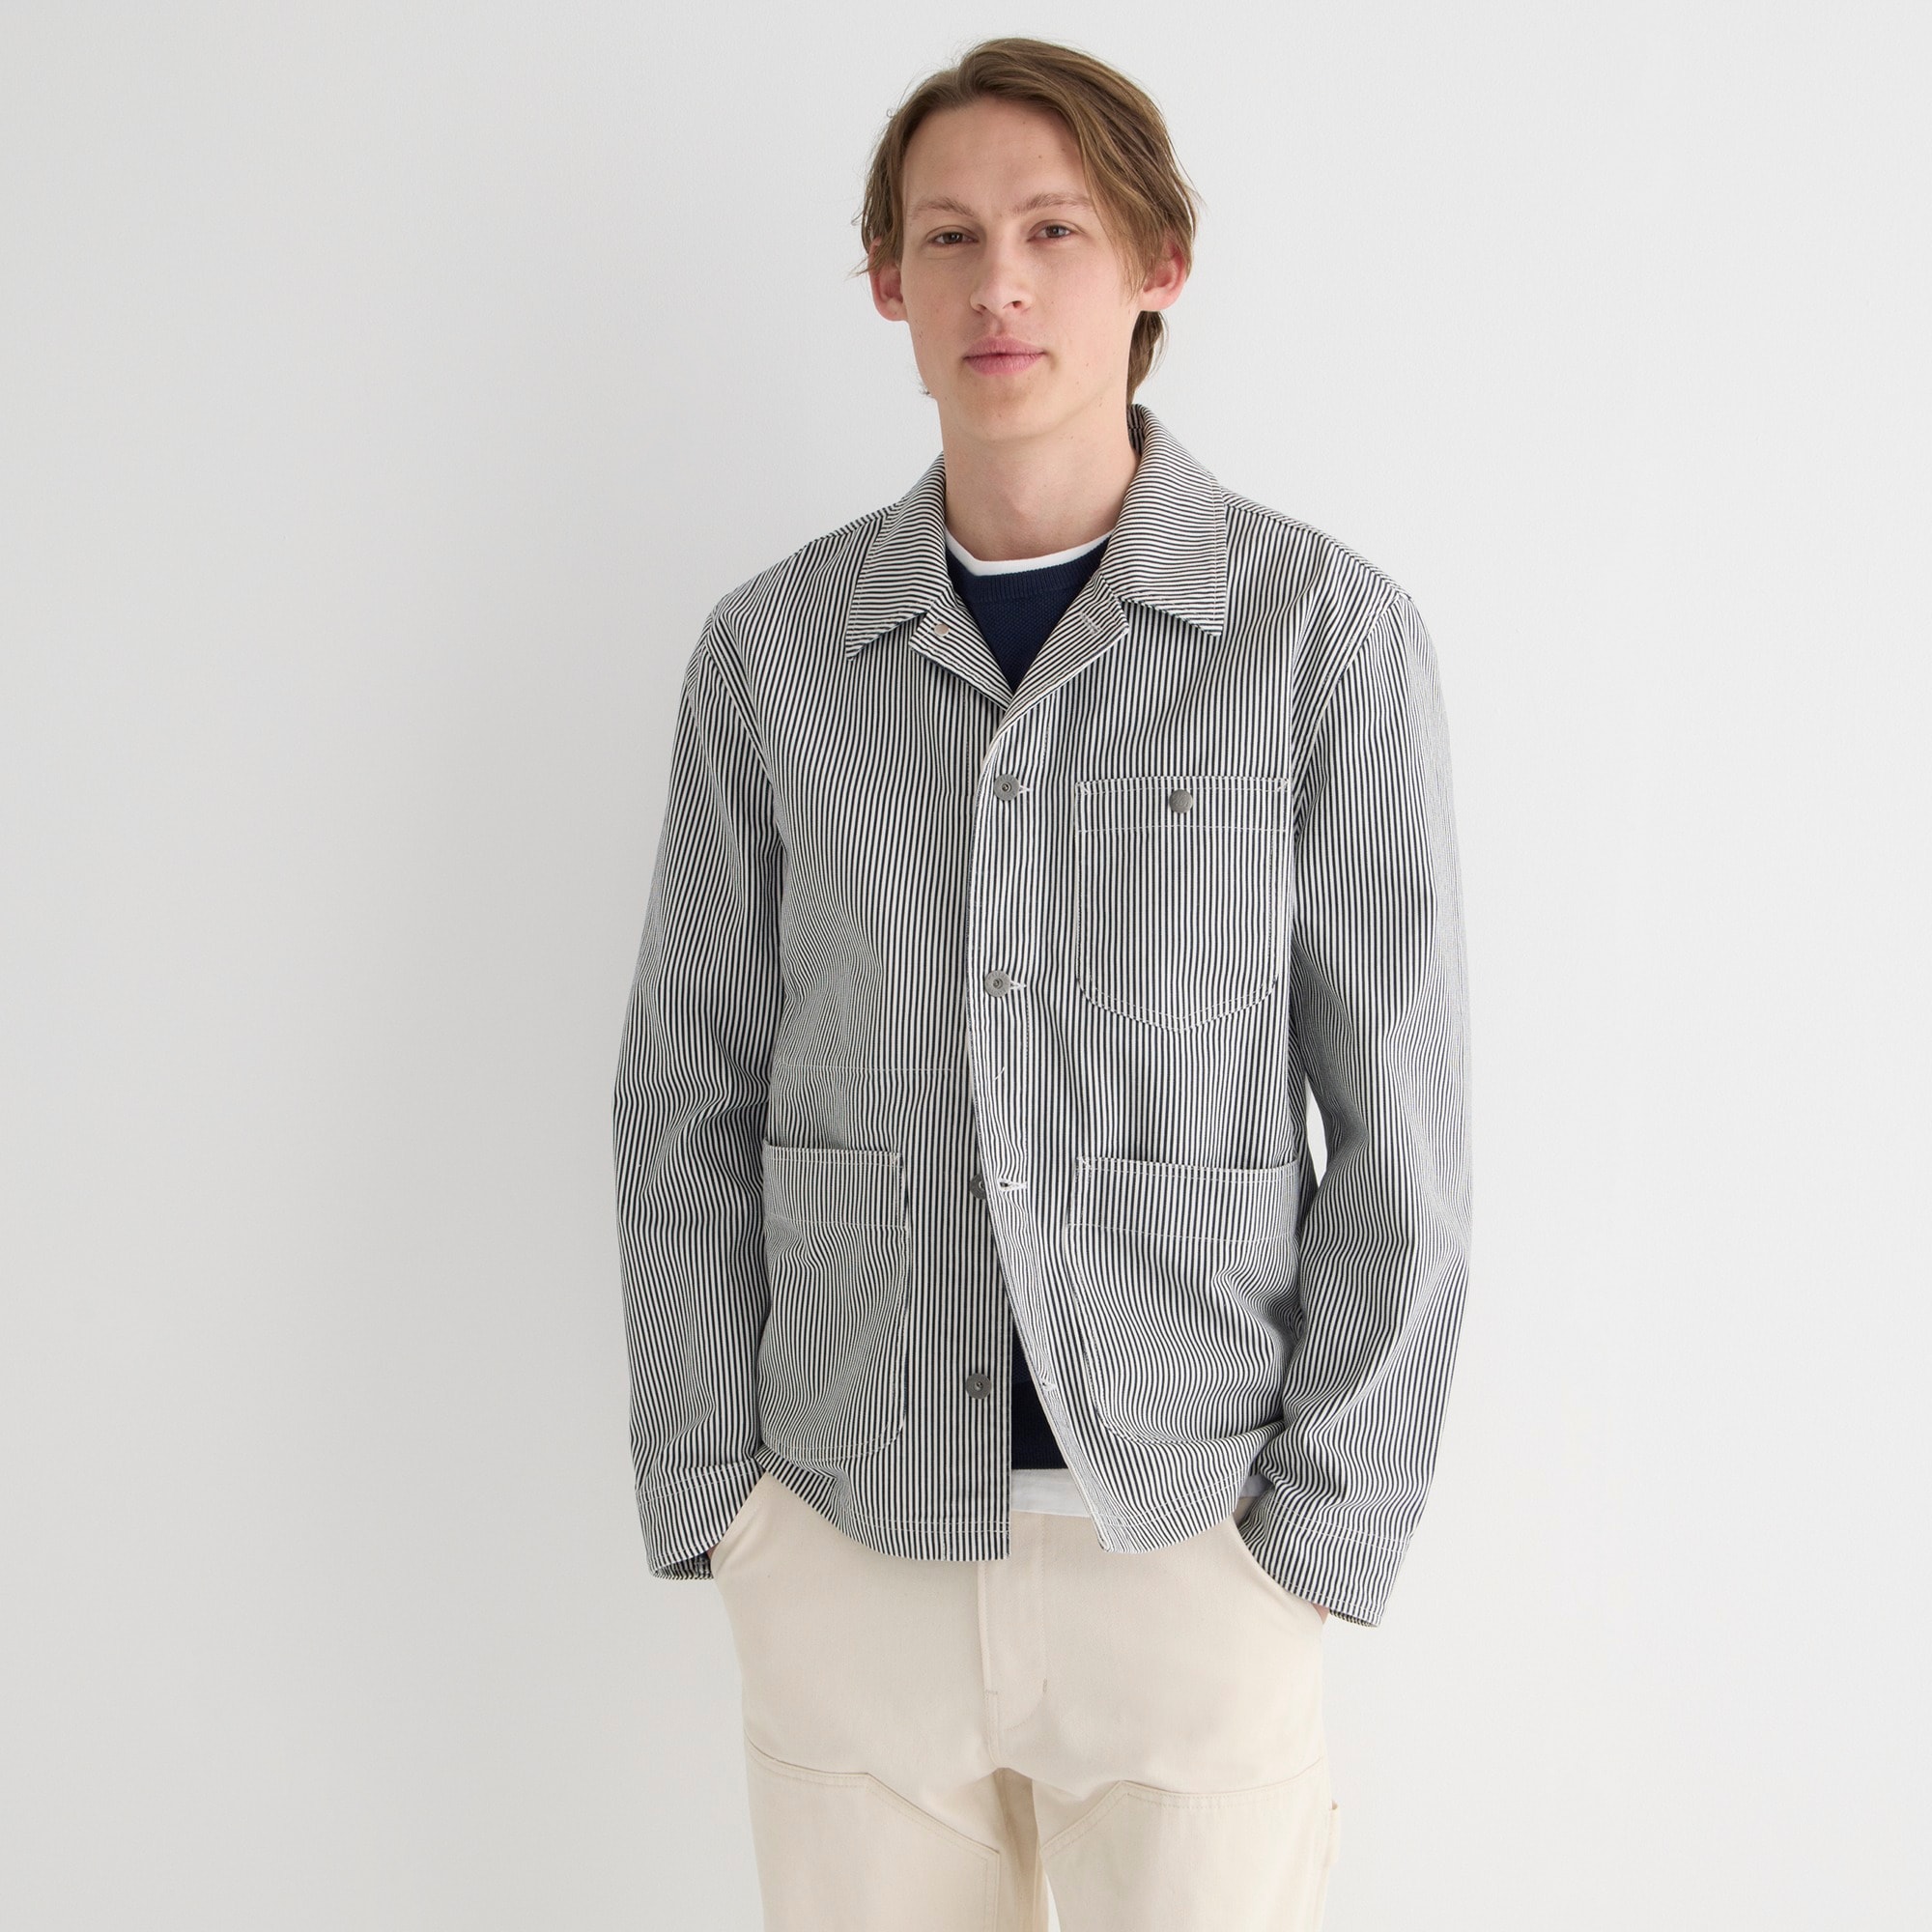 Wallace & Barnes duck canvas chore jacket in hickory stripe